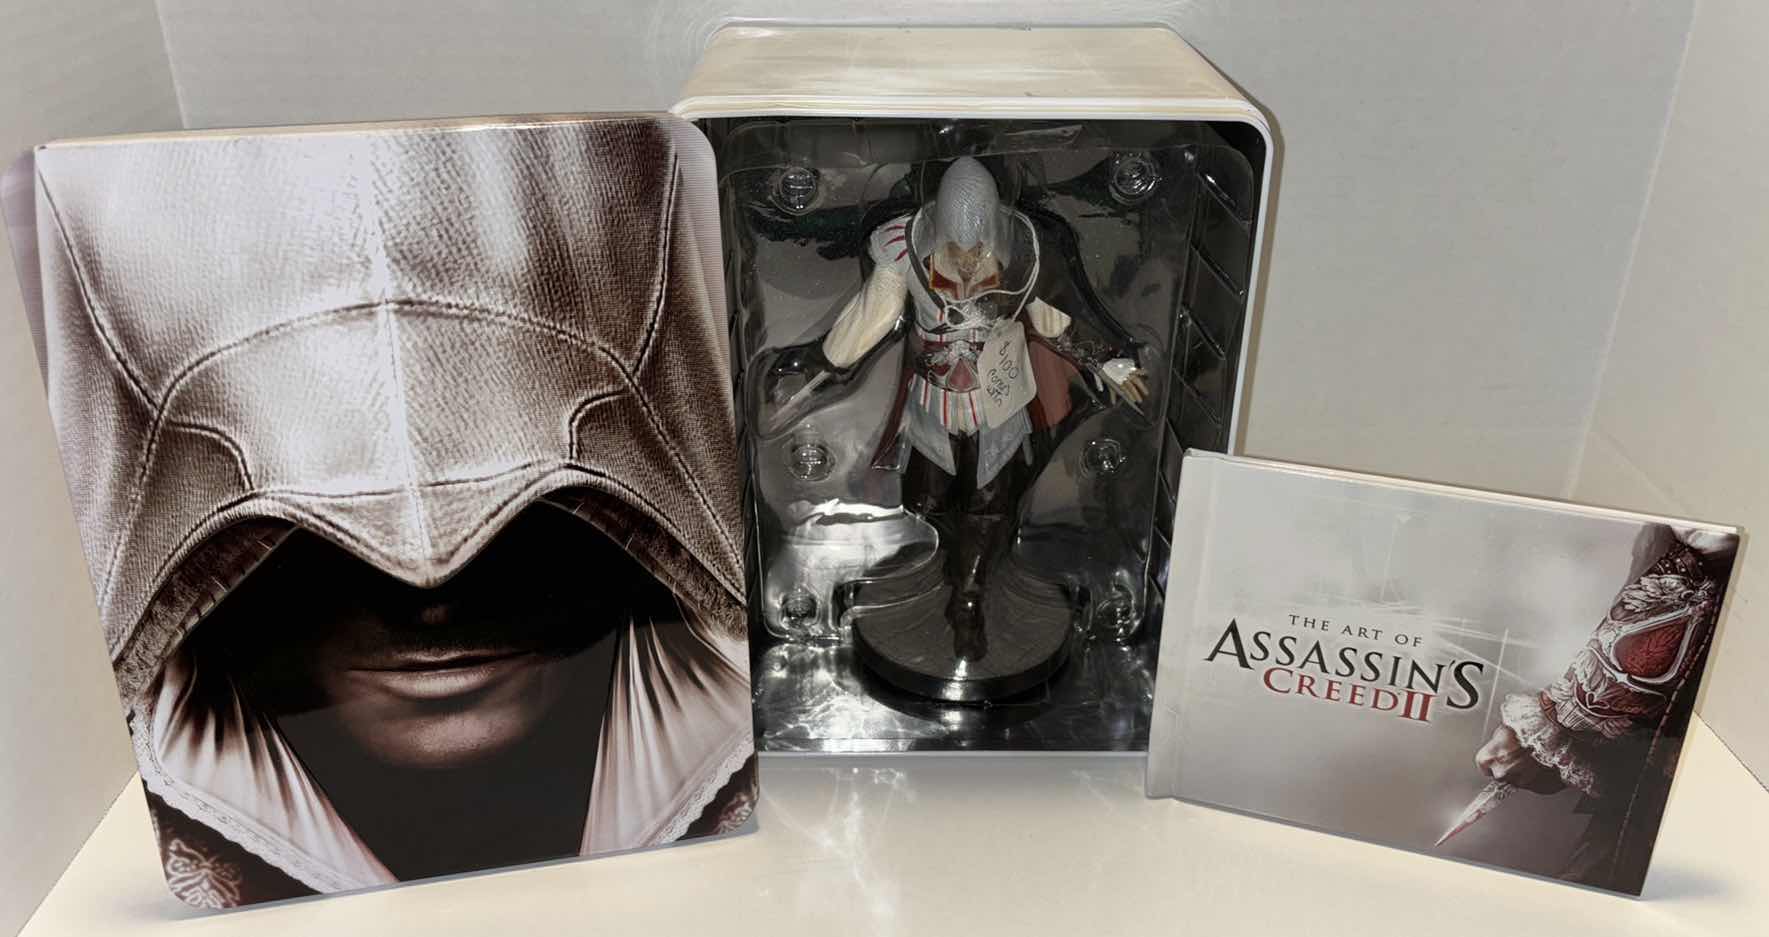 Photo 1 of UBISOFT X-BOX 360 ASSASSIN’S CREED II MASTER’S ASSASSIN’S EDITION, INCLUDES ART BOOK & STATUE IN COLLECTOR’S TIN